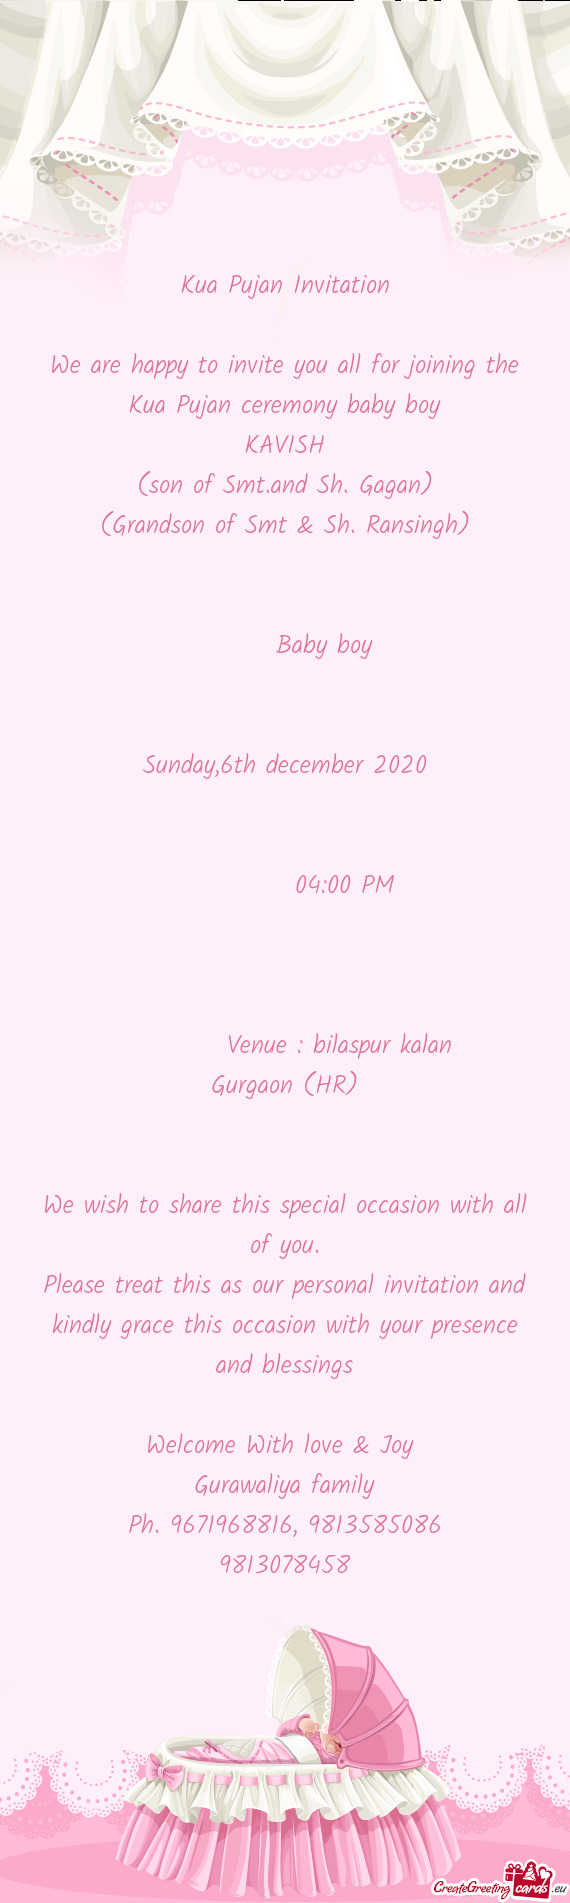 We are happy to invite you all for joining the Kua Pujan ceremony baby boy